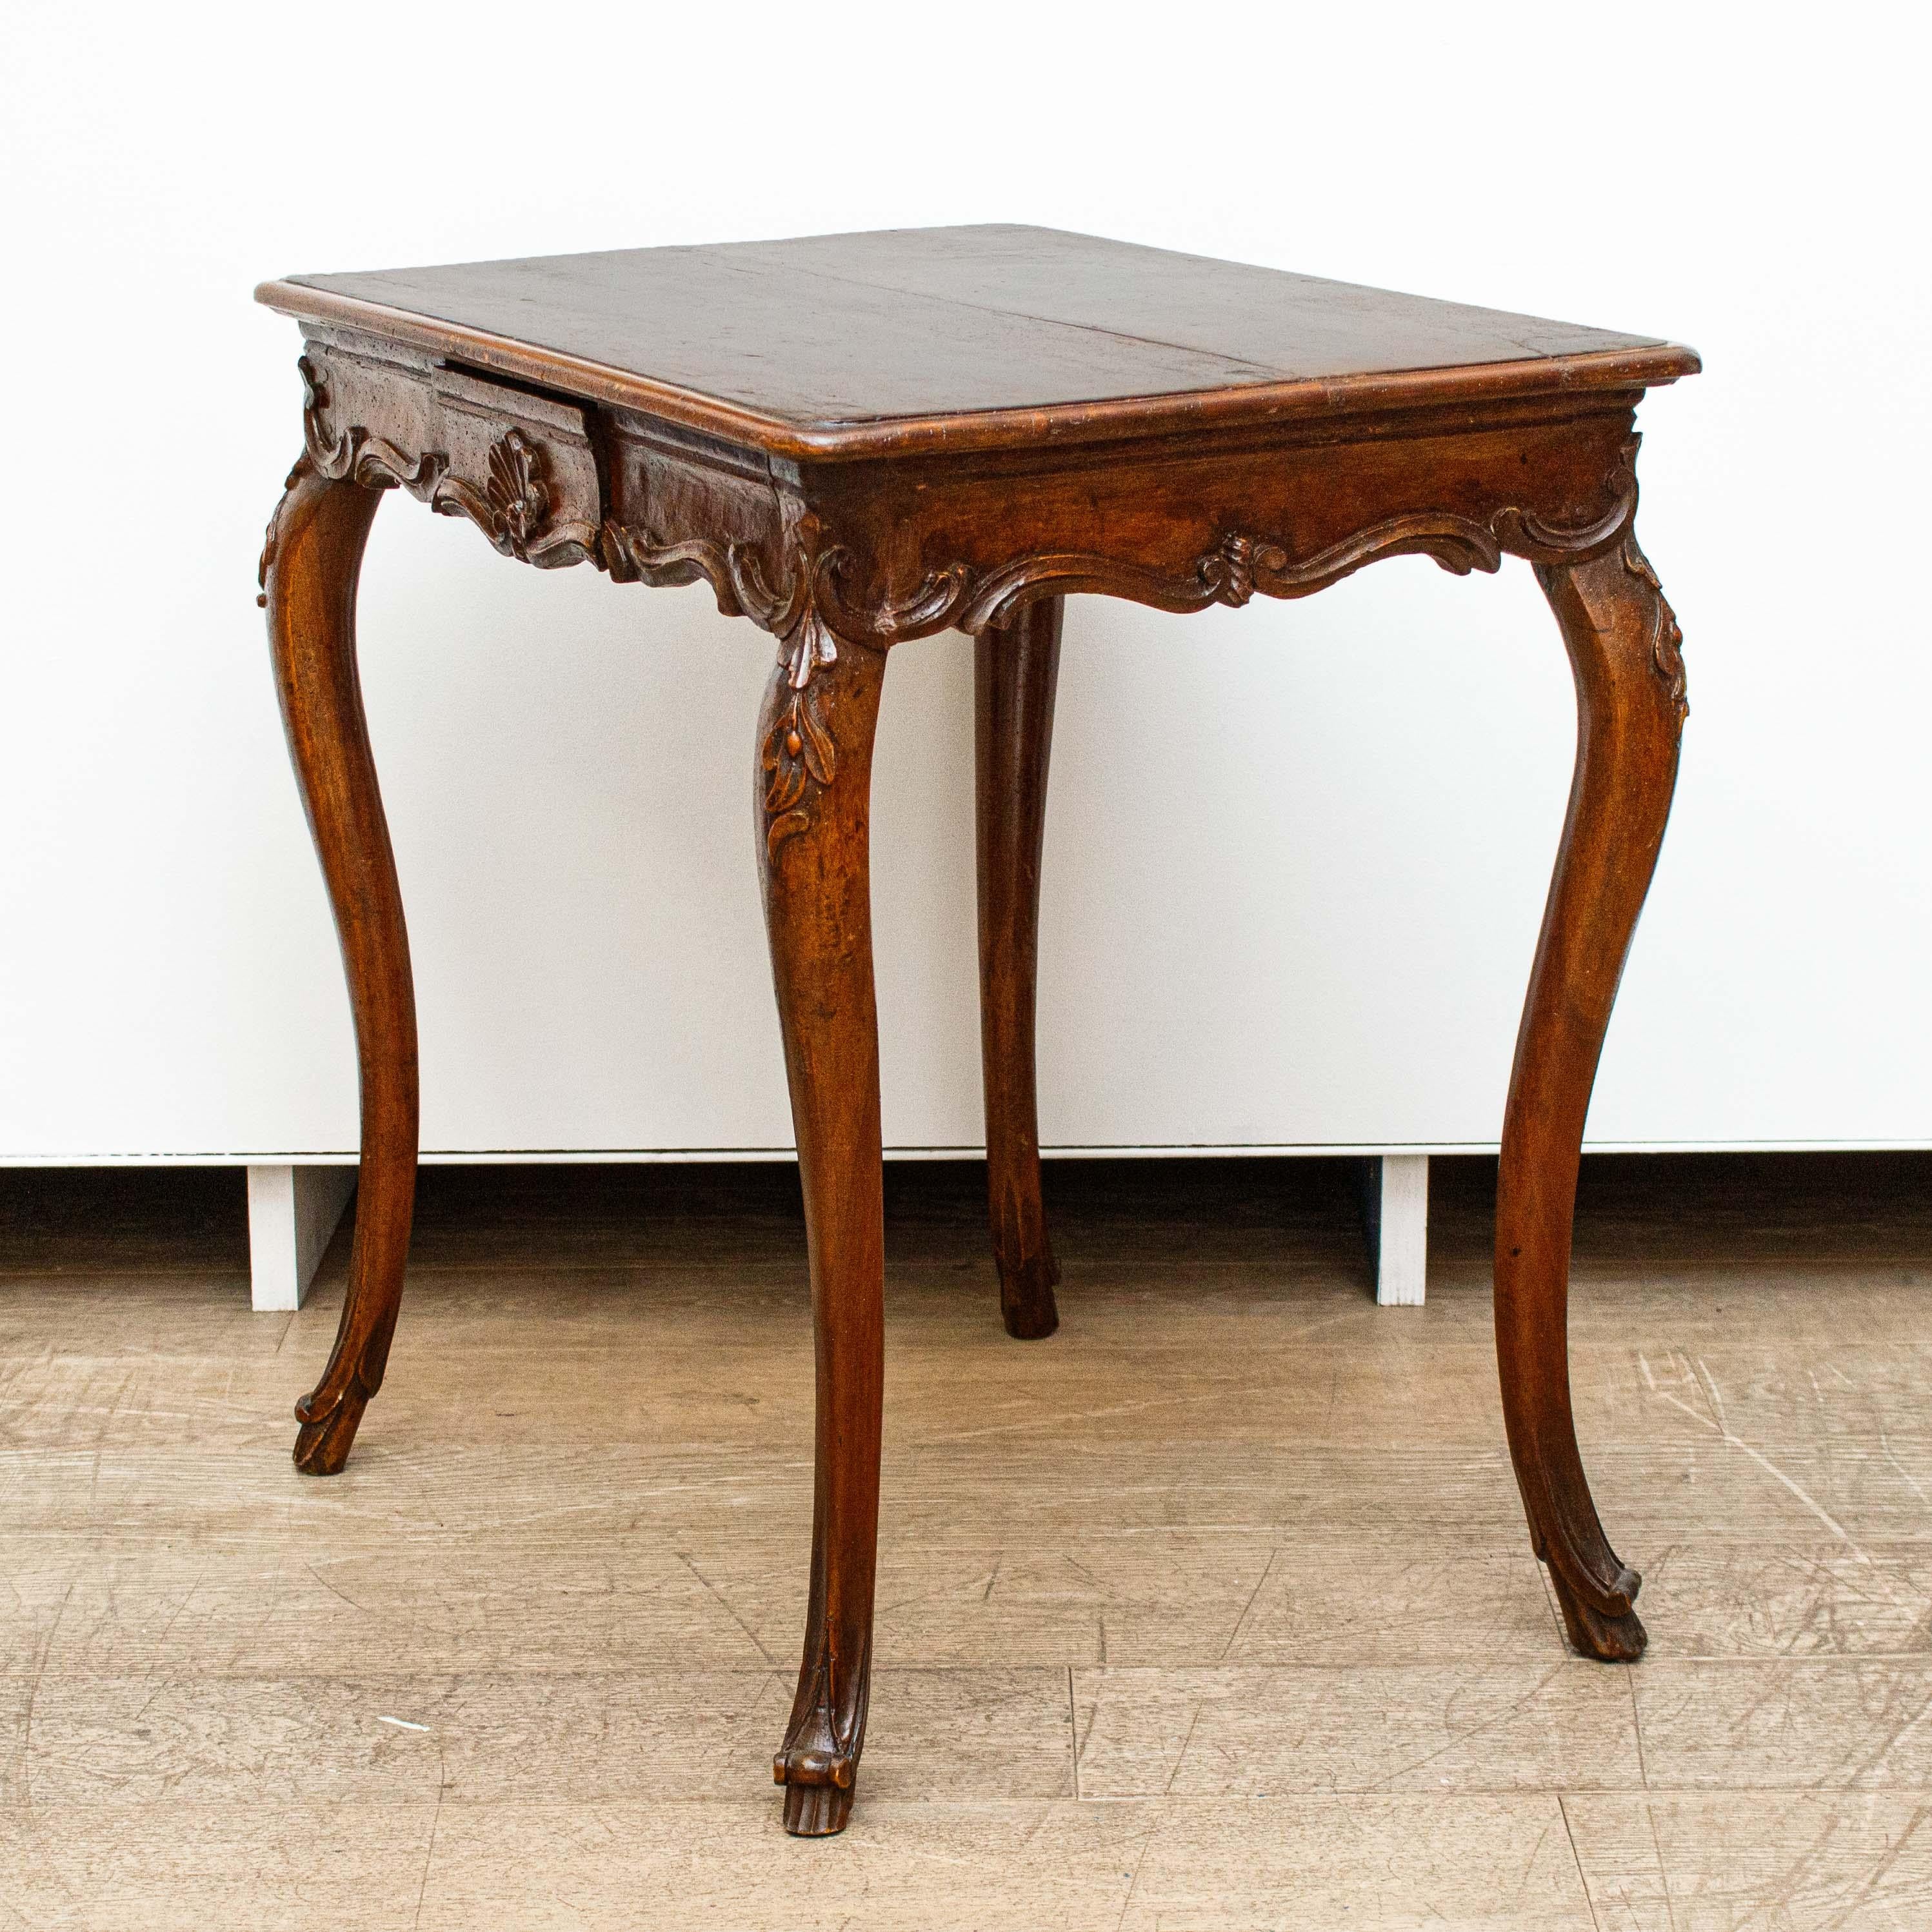 Venice, 18th century
Coffee table
Walnut wood, cm 76 x 73 x 53


Small and refined this elegant coffee table in walnut wood has a small central drawer and is finely carved with the addition of delicate vegetal and volute motifs with a central